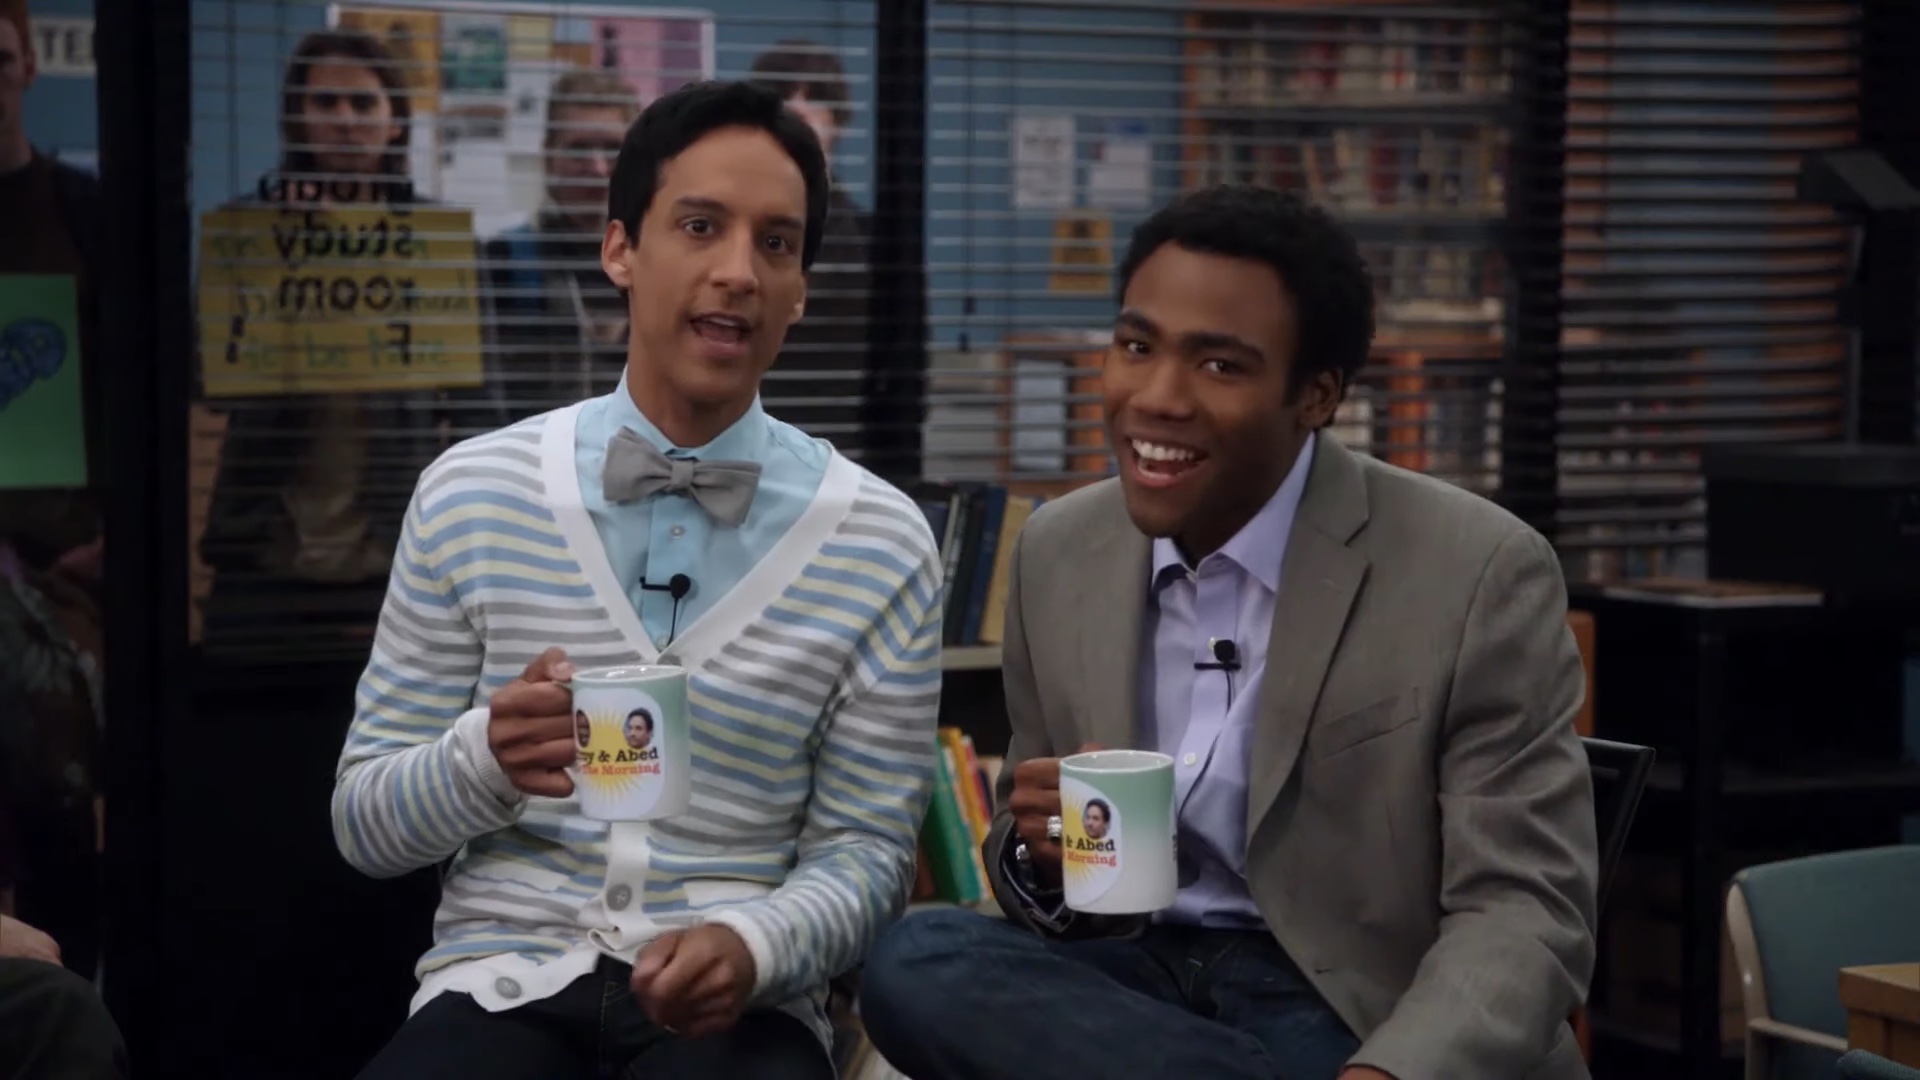 Troy and Abed holding coffee mugs in "Community."